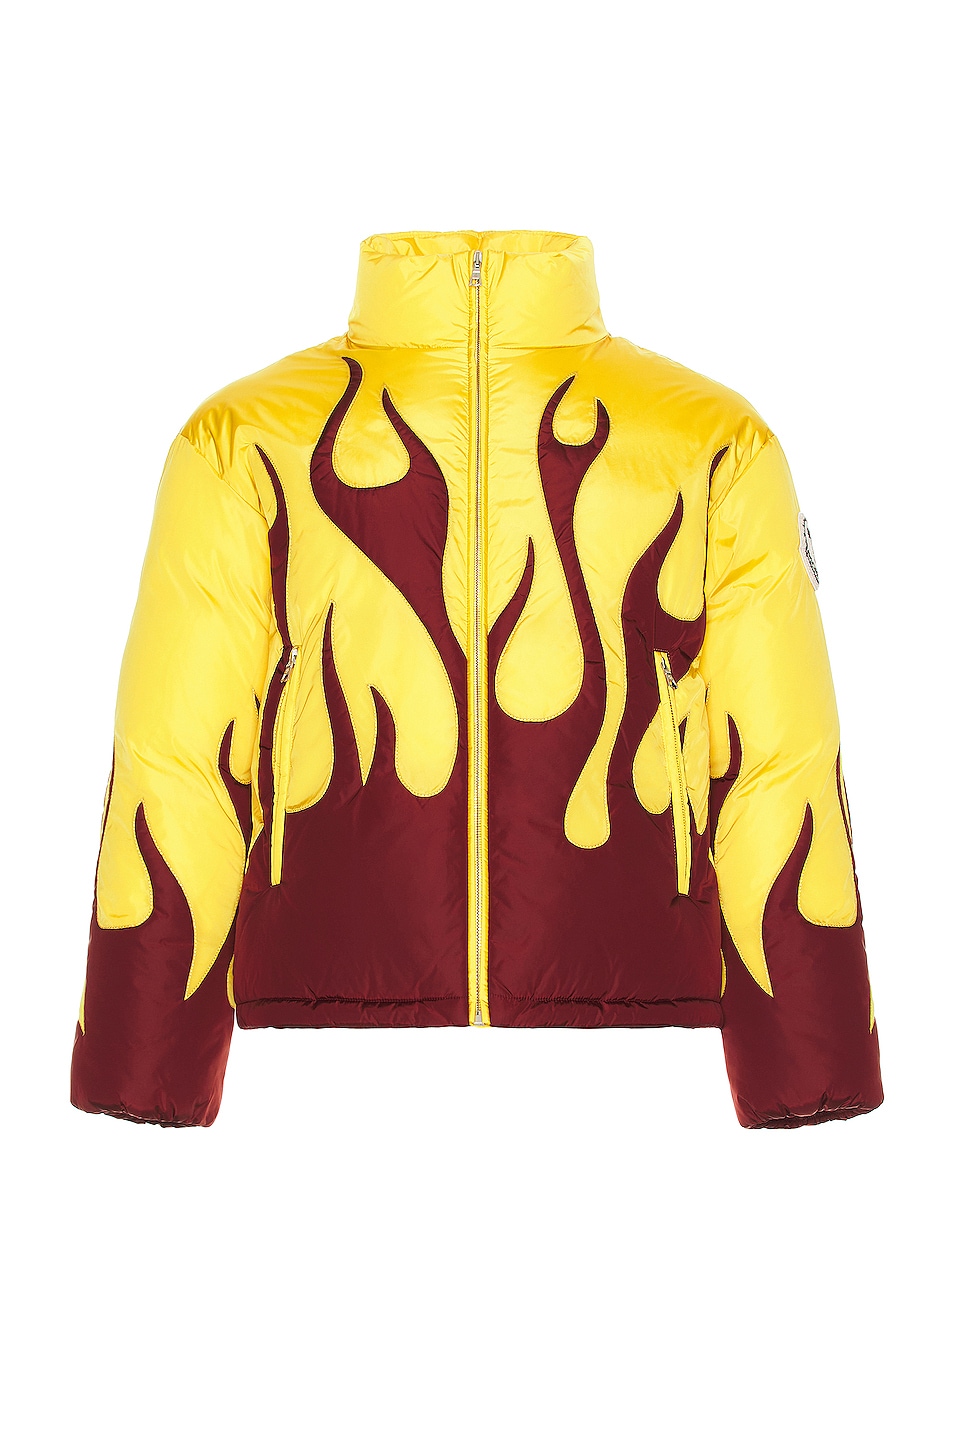 Image 1 of Moncler Genius 8 Moncler Palm Angels Clancy Jacket in Red Yellow Flame